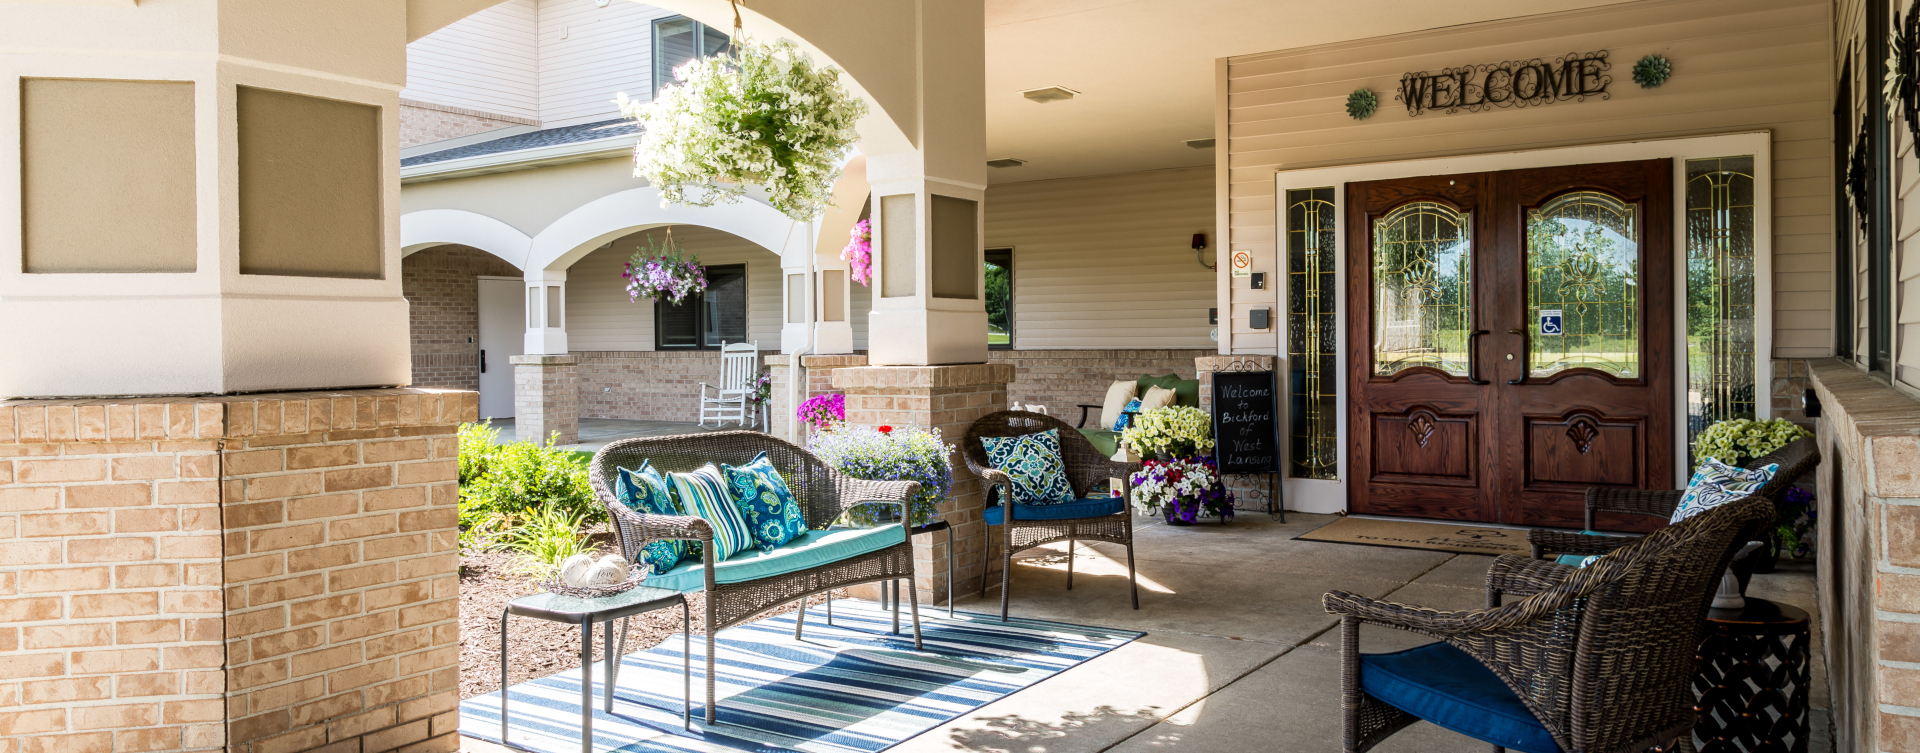 Sip on your favorite drink on the porch at Bickford of West Lansing